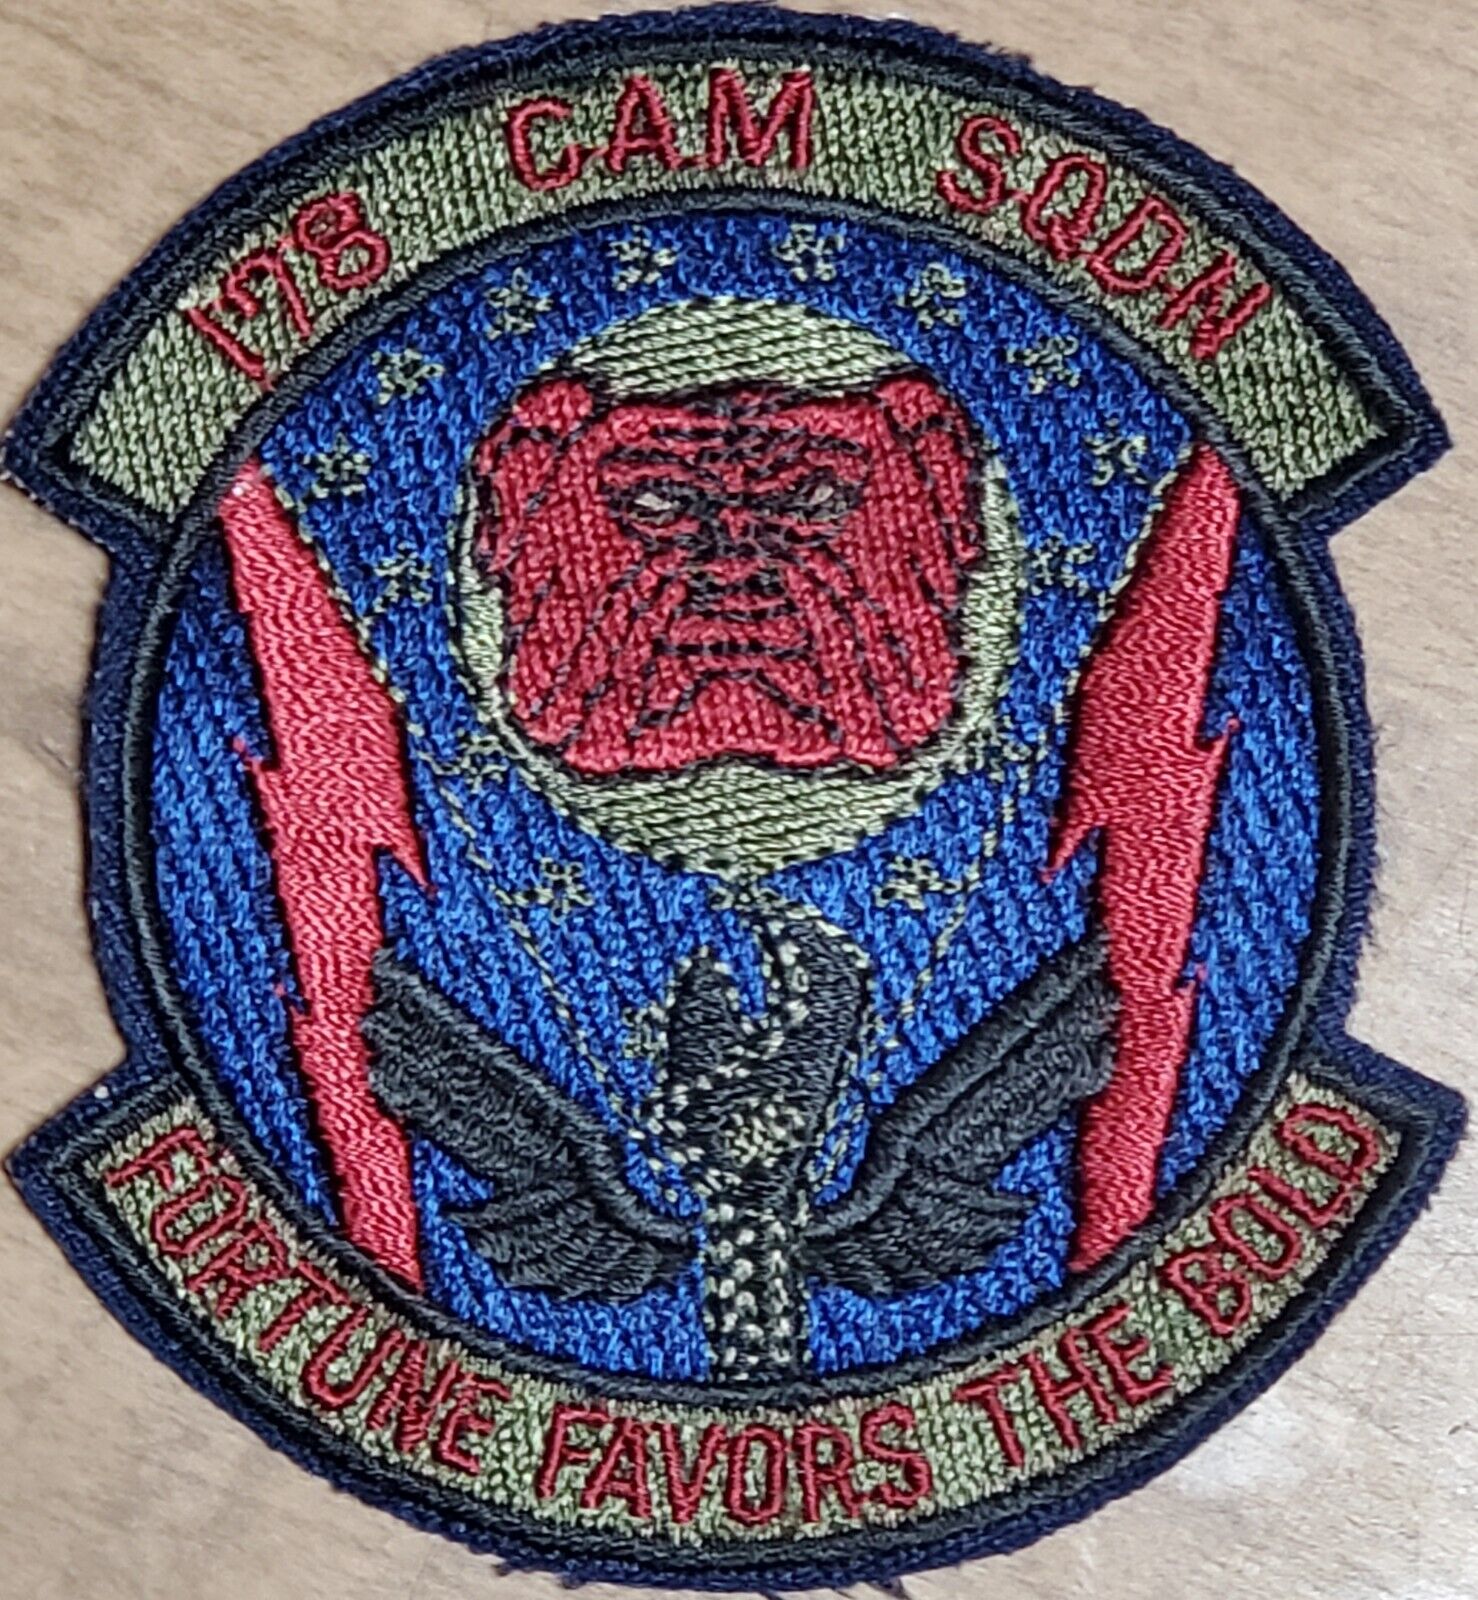 USAF 178th CAM CONSOLIDATED AIRCRAFT MAINTENANCE SQDN Patch Subdued VTG ORG MIL